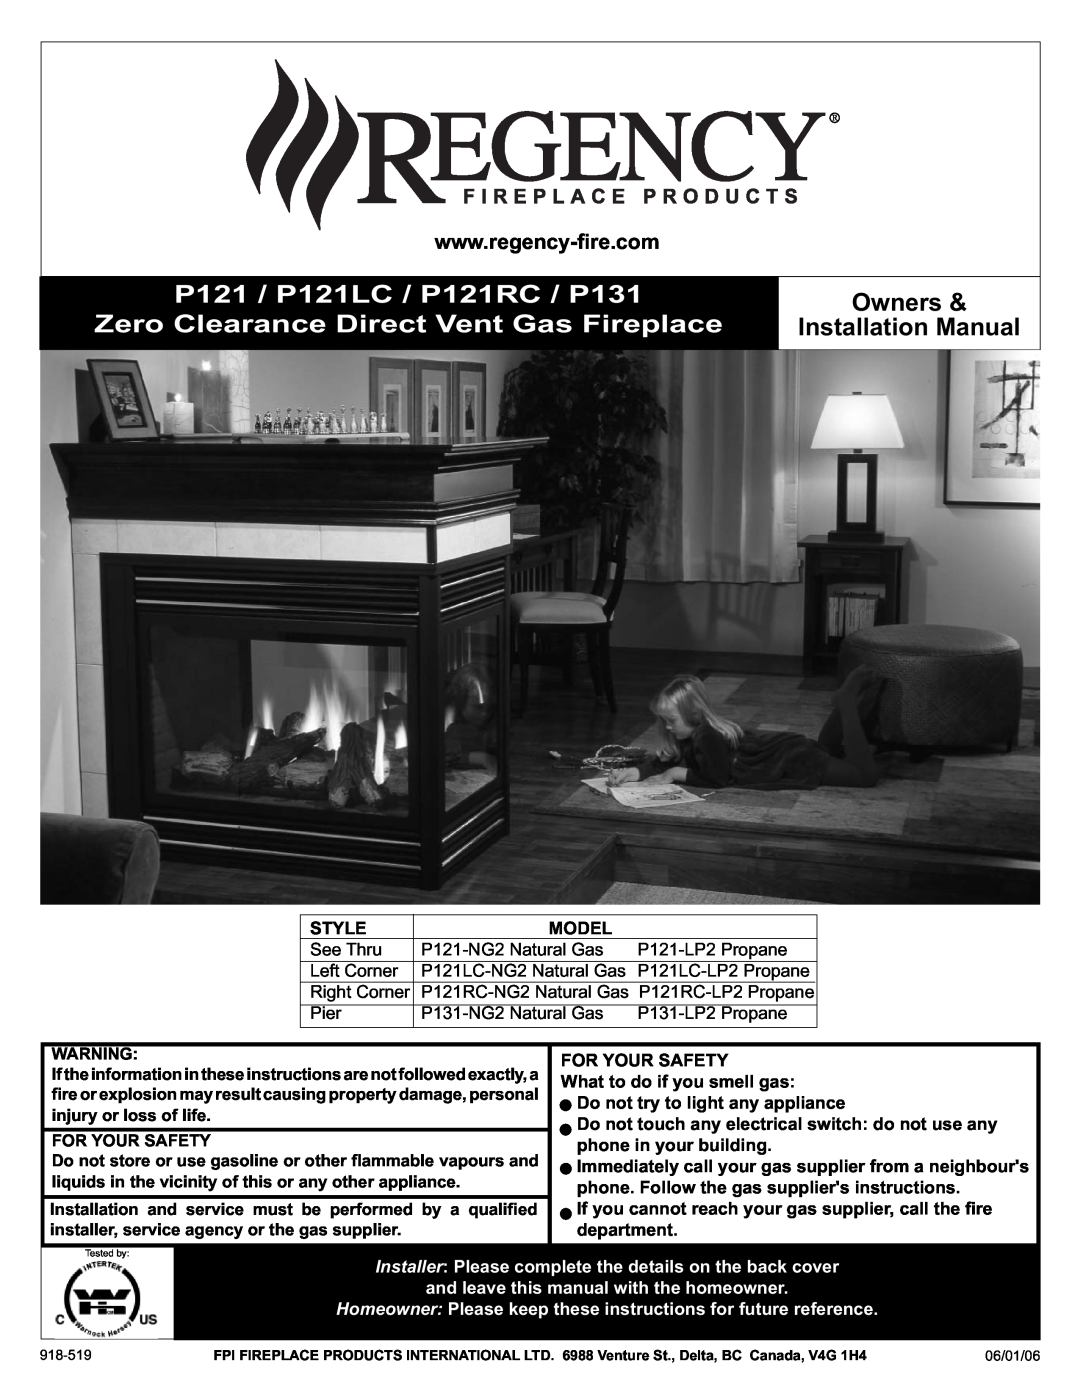 Regency installation manual P121 / P121LC / P121RC / P131, Zero Clearance Direct Vent Gas Fireplace, Style, Model 